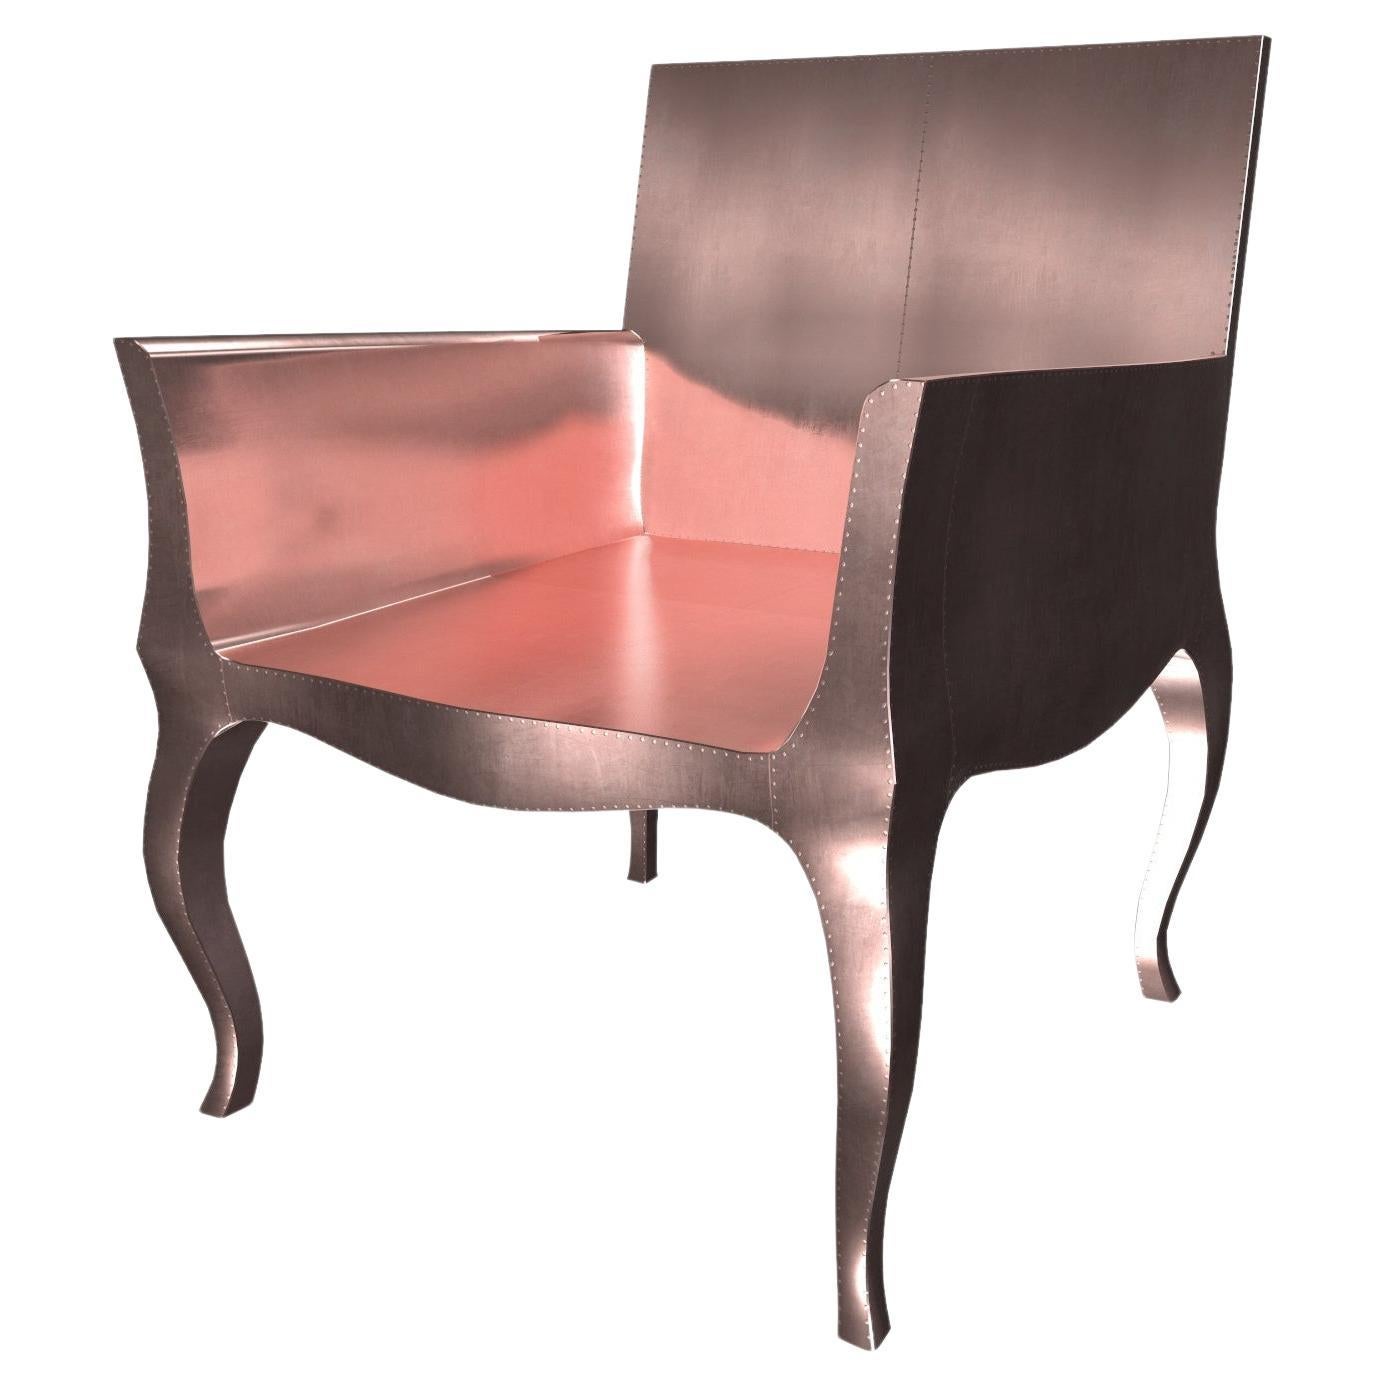 Art Nouveau Chairs in Smooth Copper by Paul Mathieu for S. Odegard